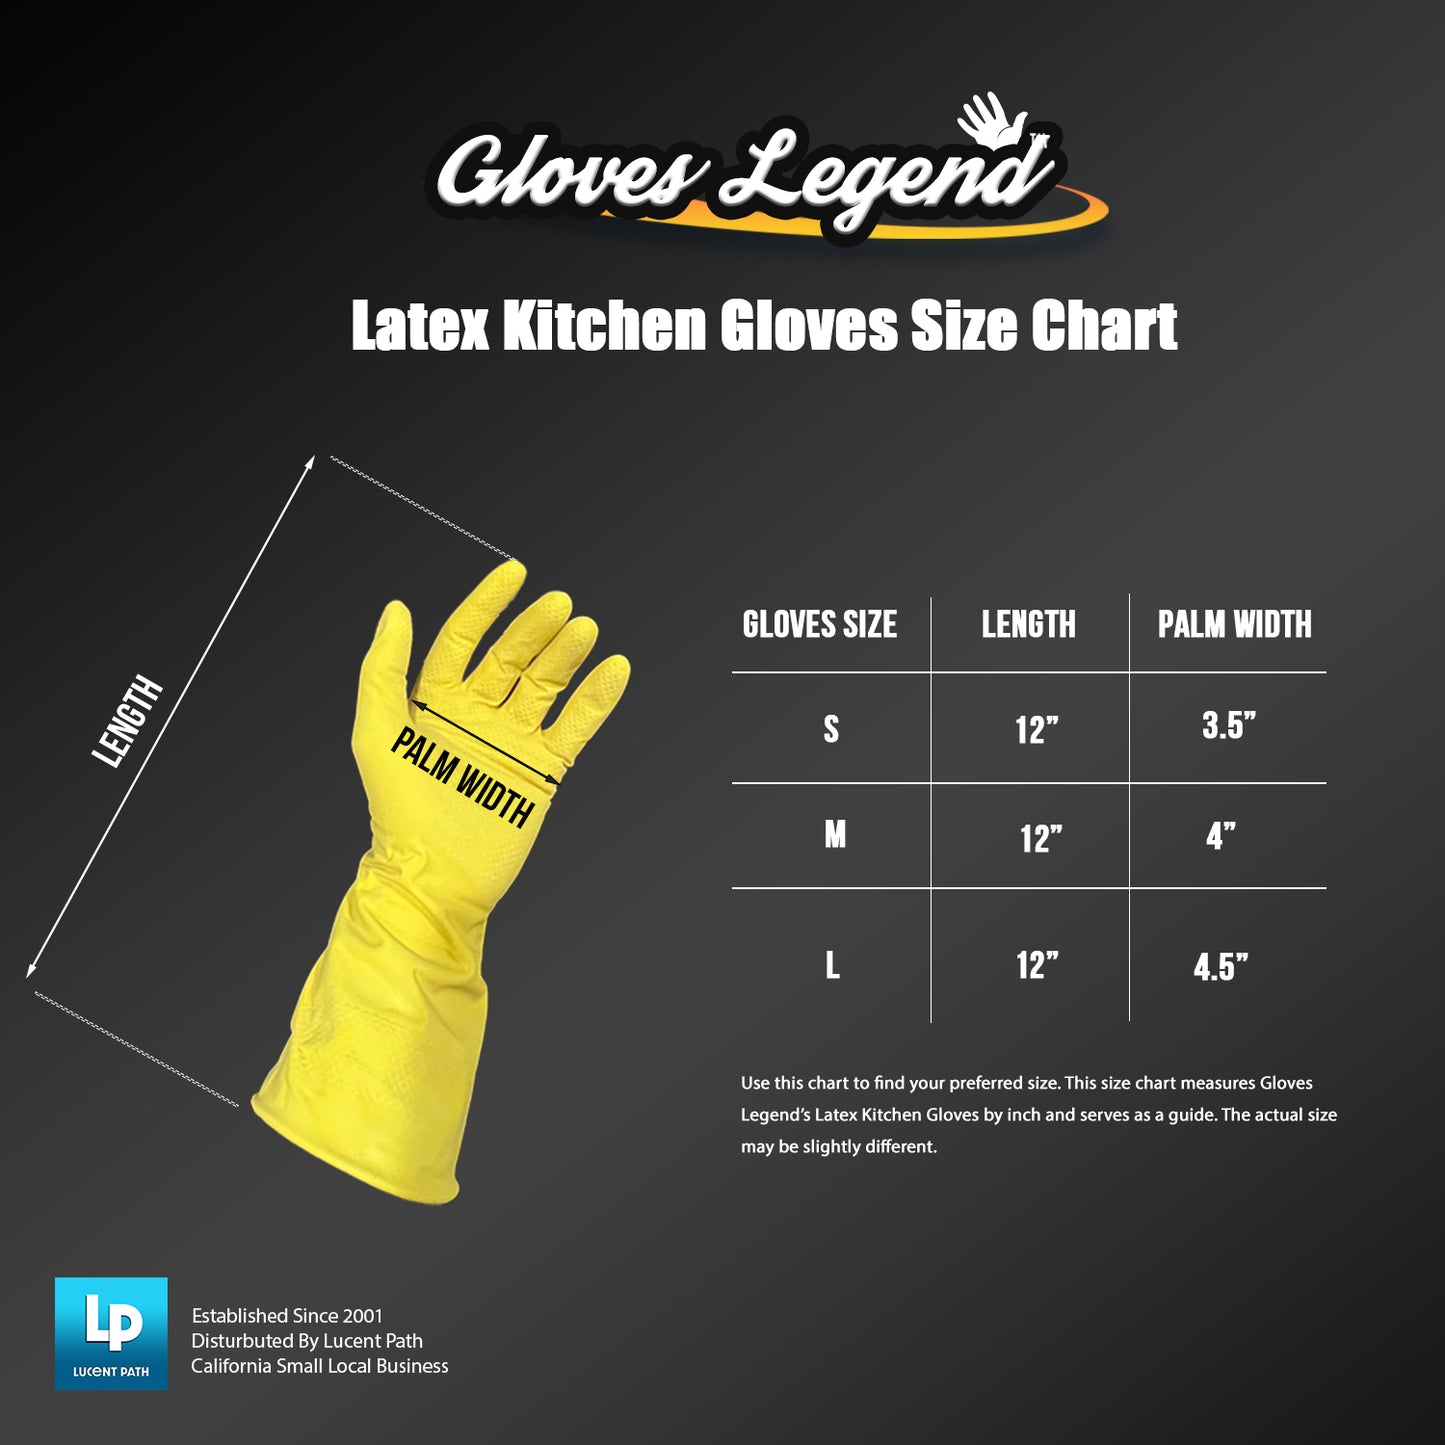 Large - 12 Pairs (24 Gloves) 12" Gloves Legend Yellow Latex Household Kitchen Cleaning Dishwashing Gloves - 18 mil